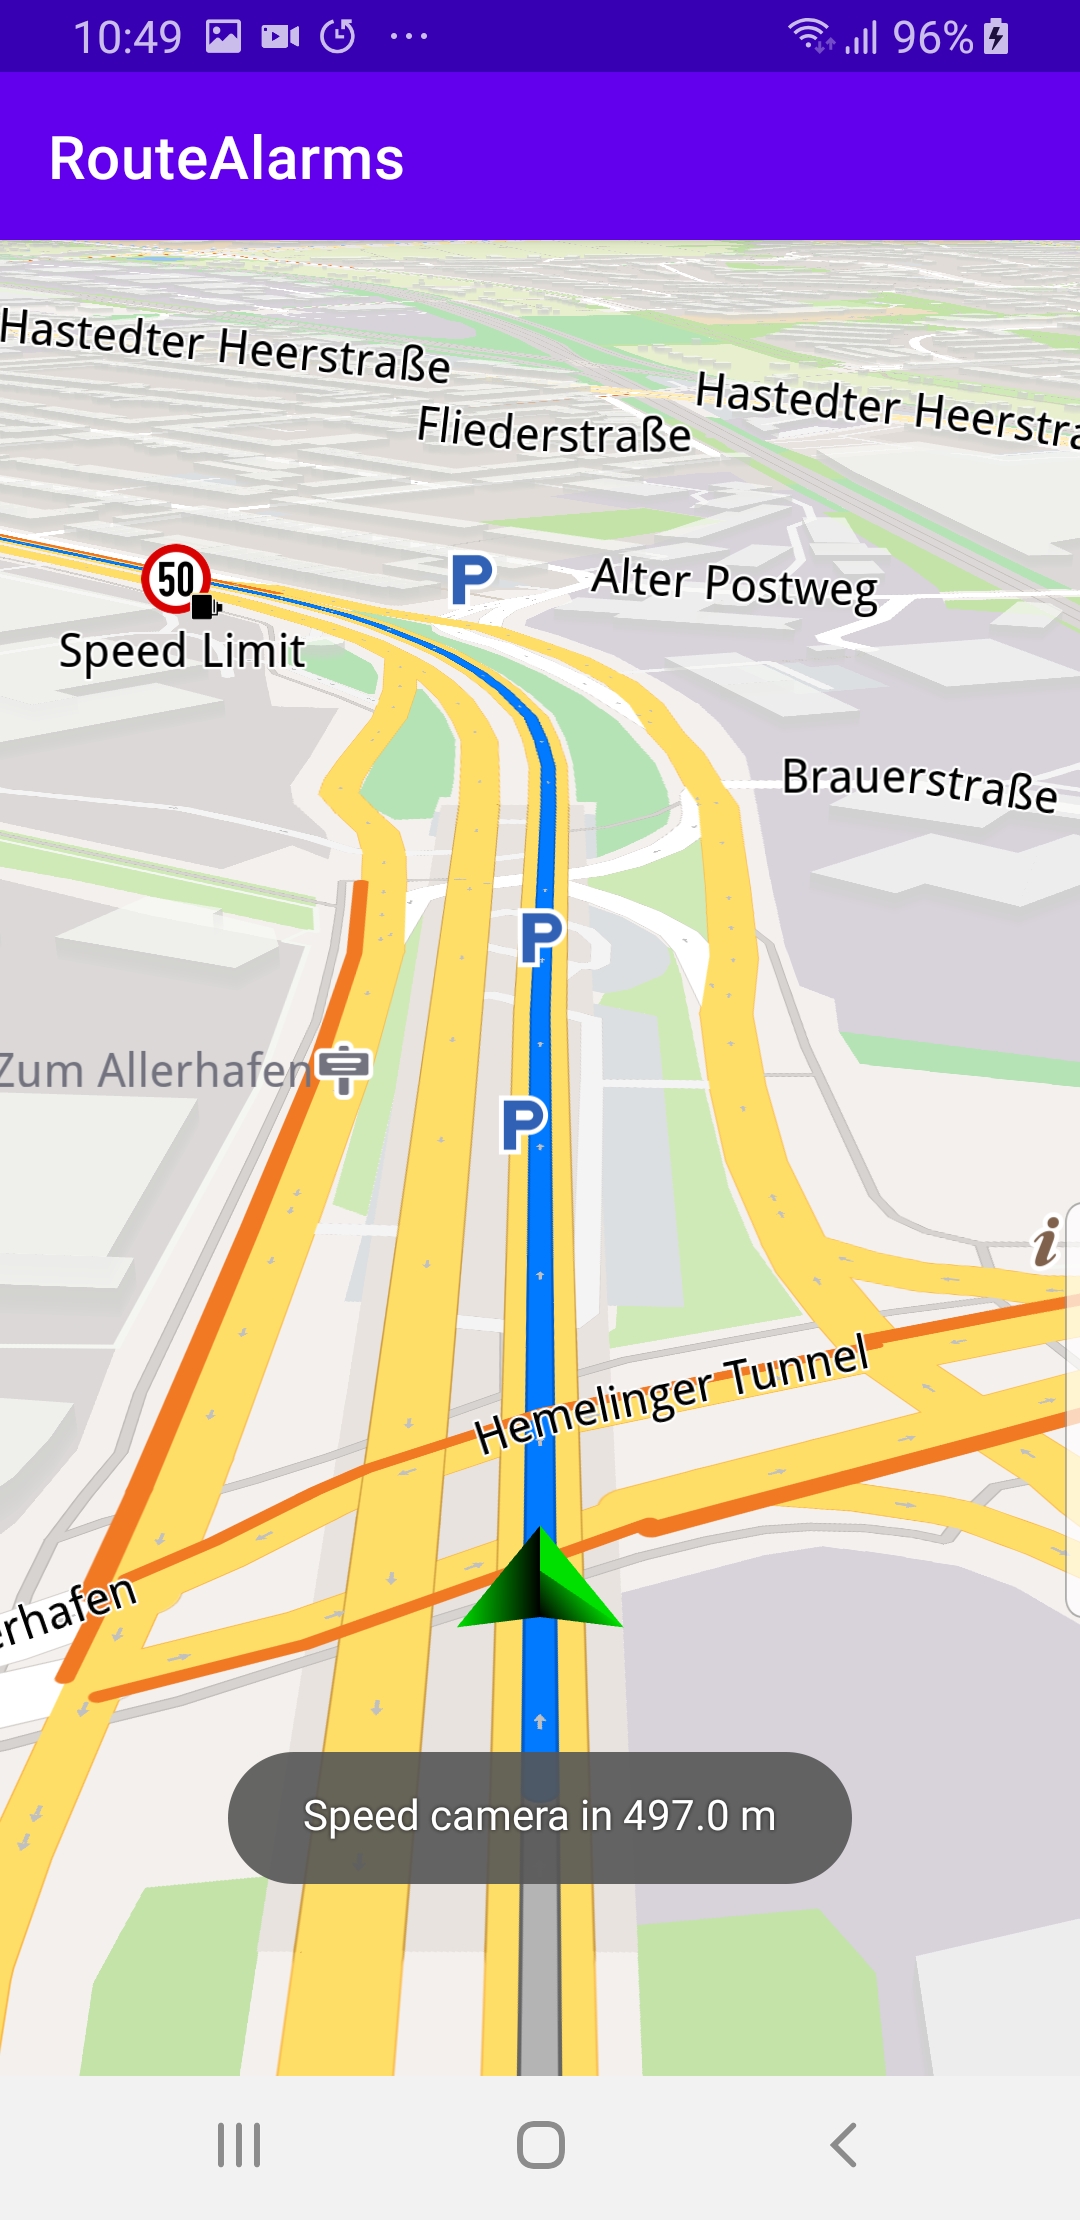 Route simulation with speed camera alarms example Android screenshot